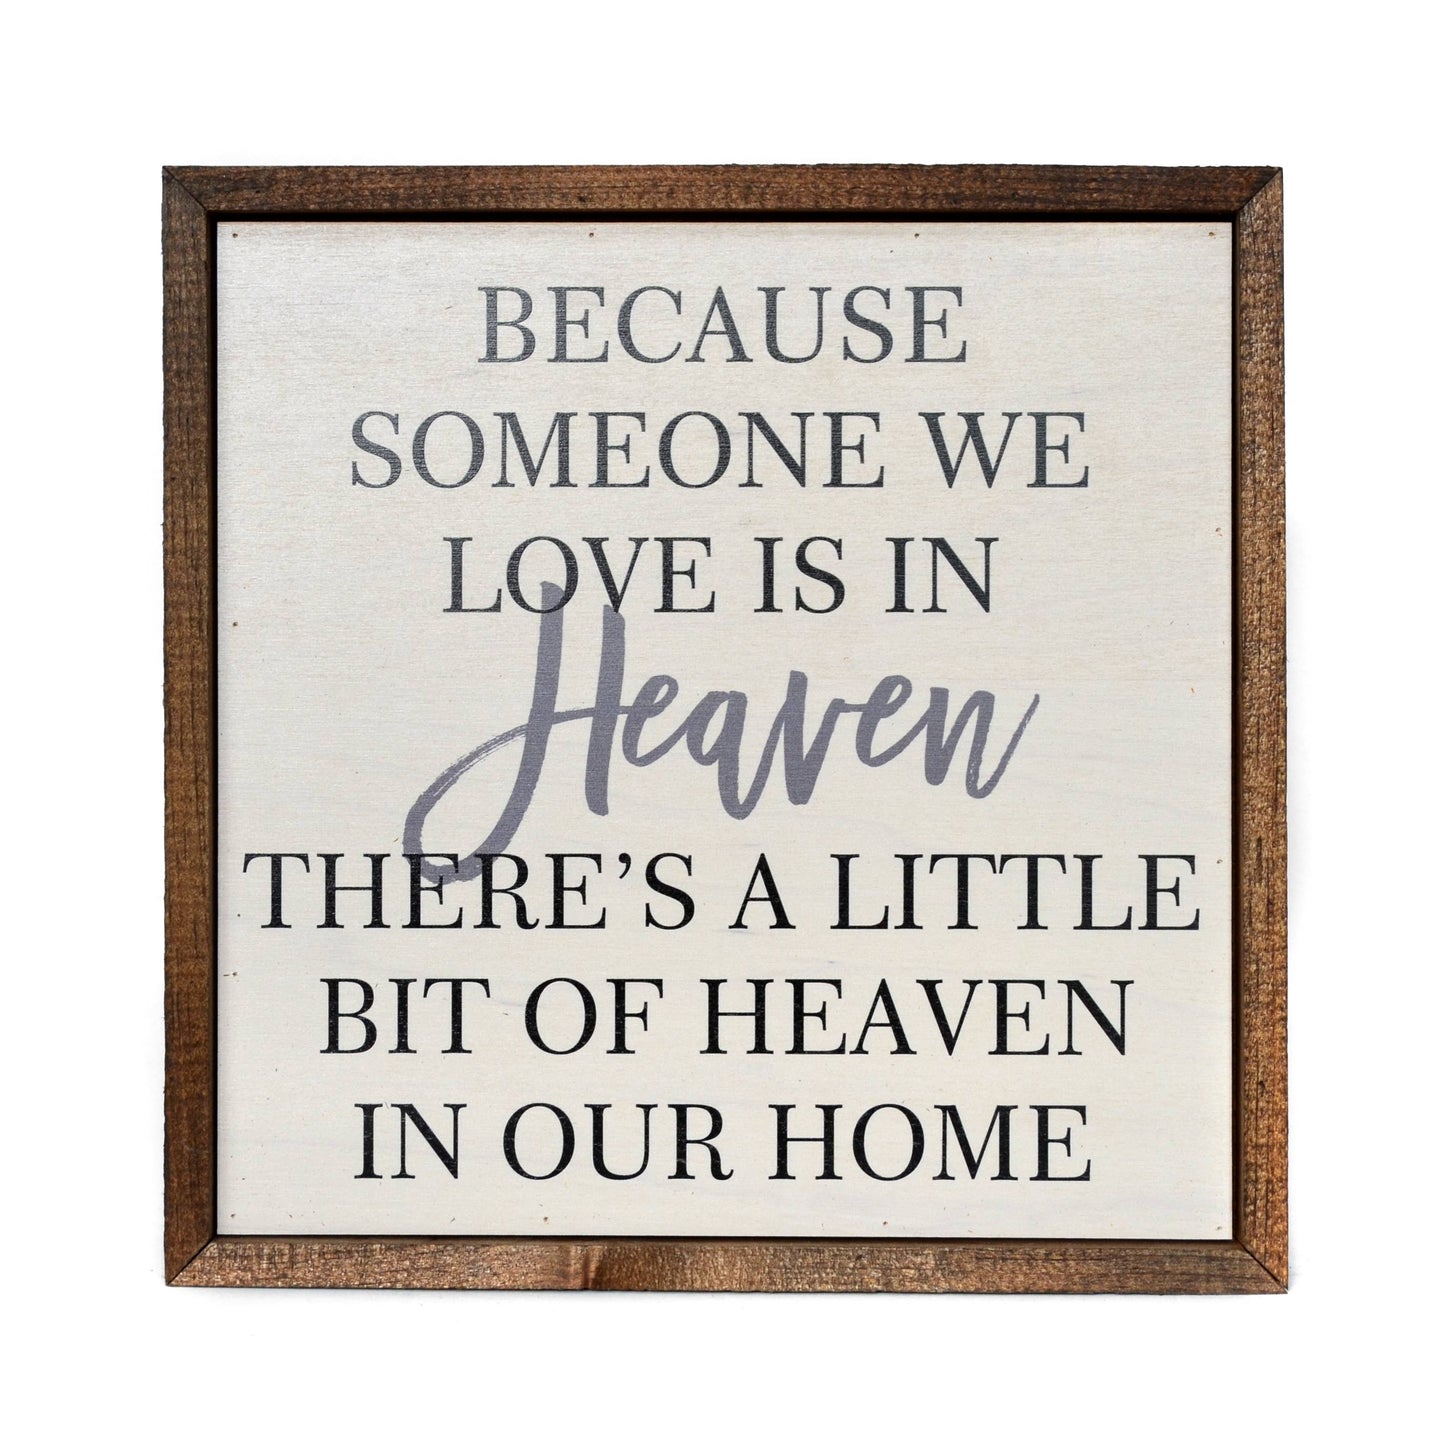 Someone We Love is in Heaven 10x10 Remembrance Sign